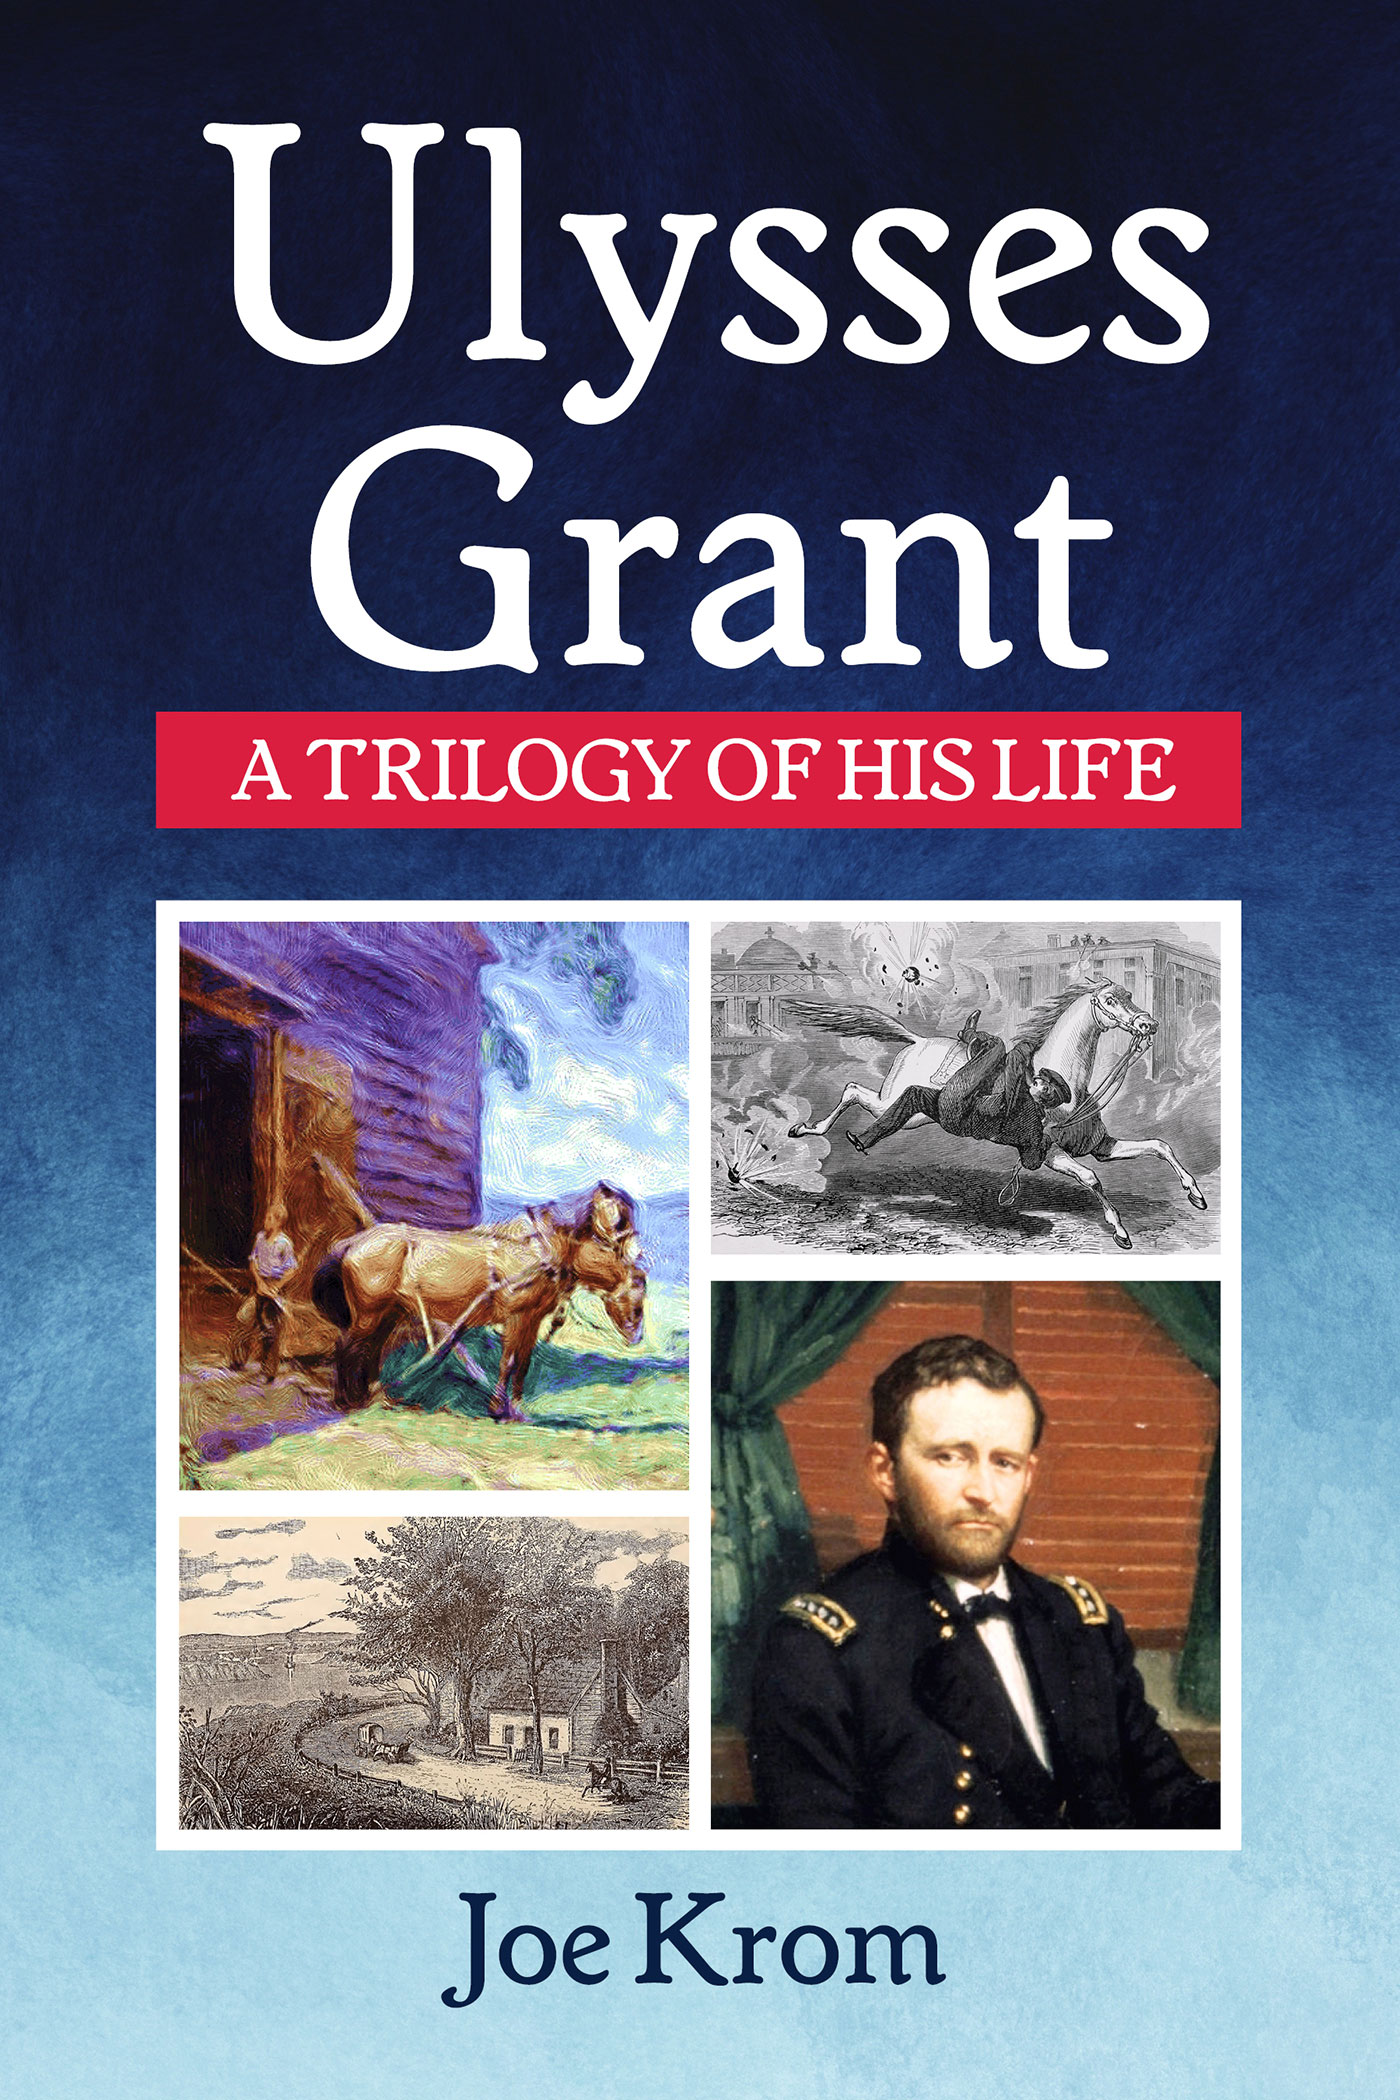 Ulysses Grant: A Trilogy of His Life by Joe Krom